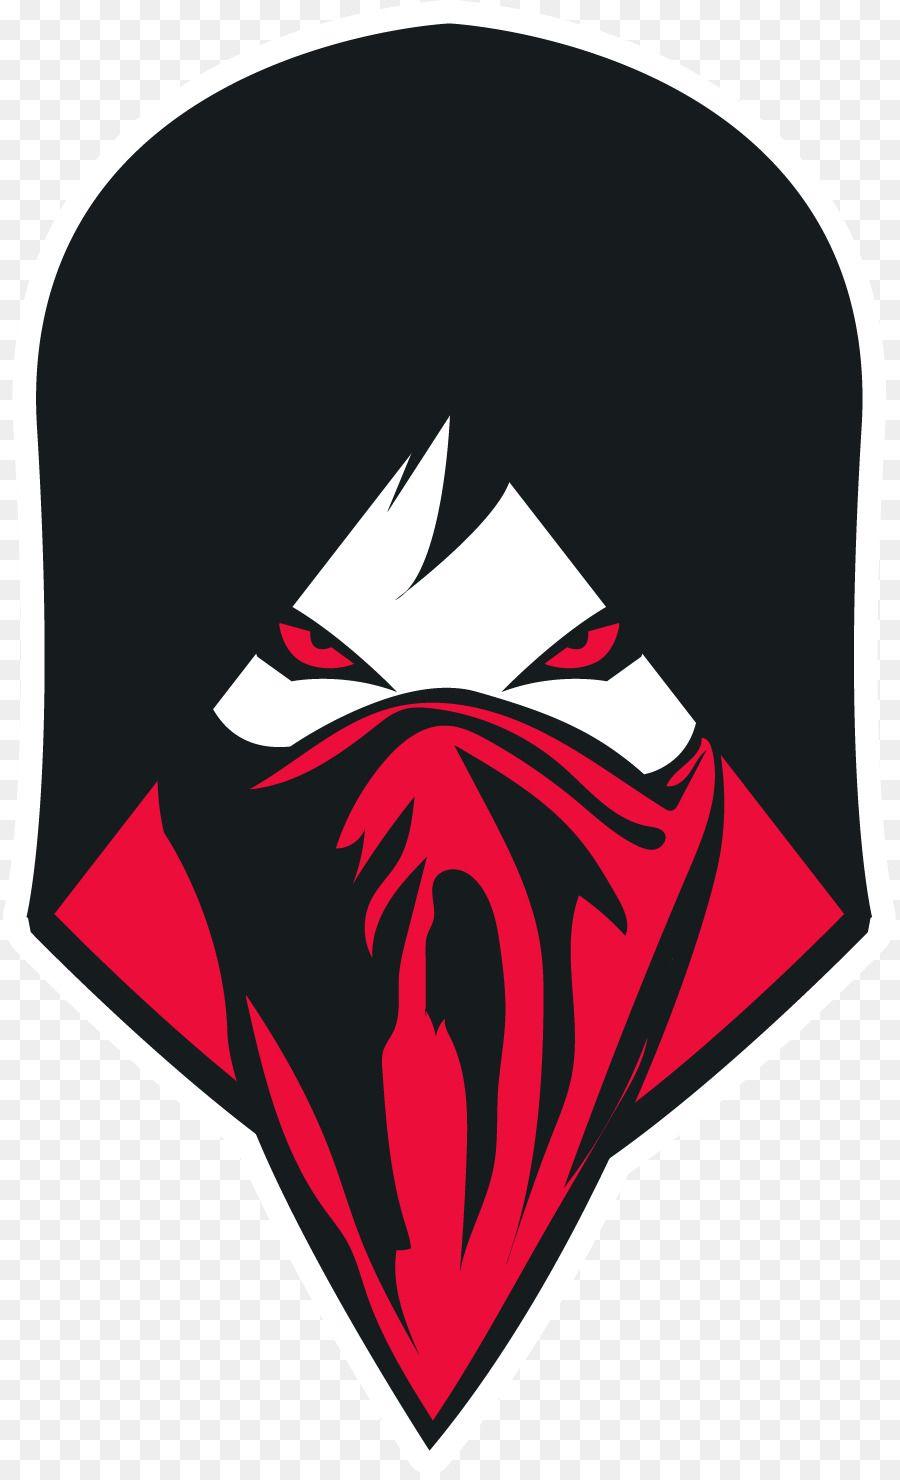 Red Minecraft Logo - League of Legends Electronic sports Minecraft Logo esport png